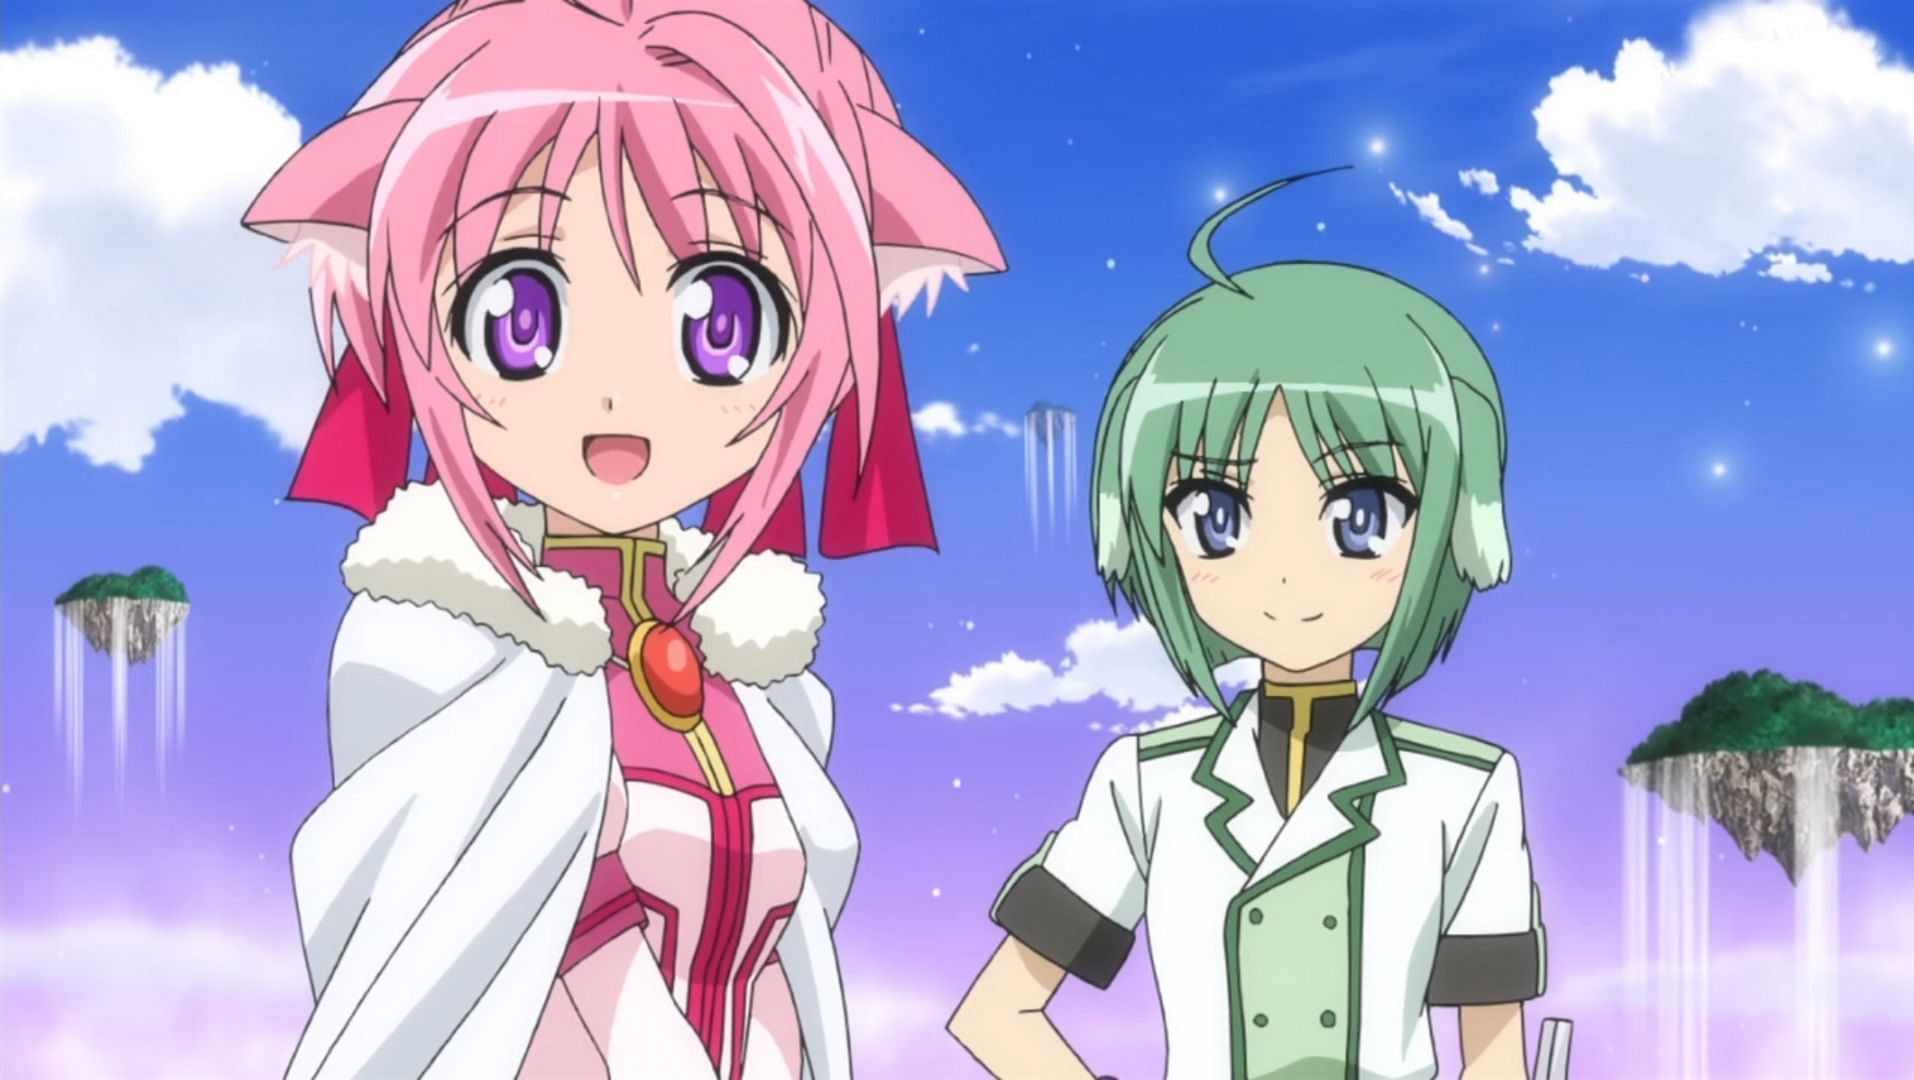 Millhiore (left) as seen in the anime series (Image via Seven Arcs)